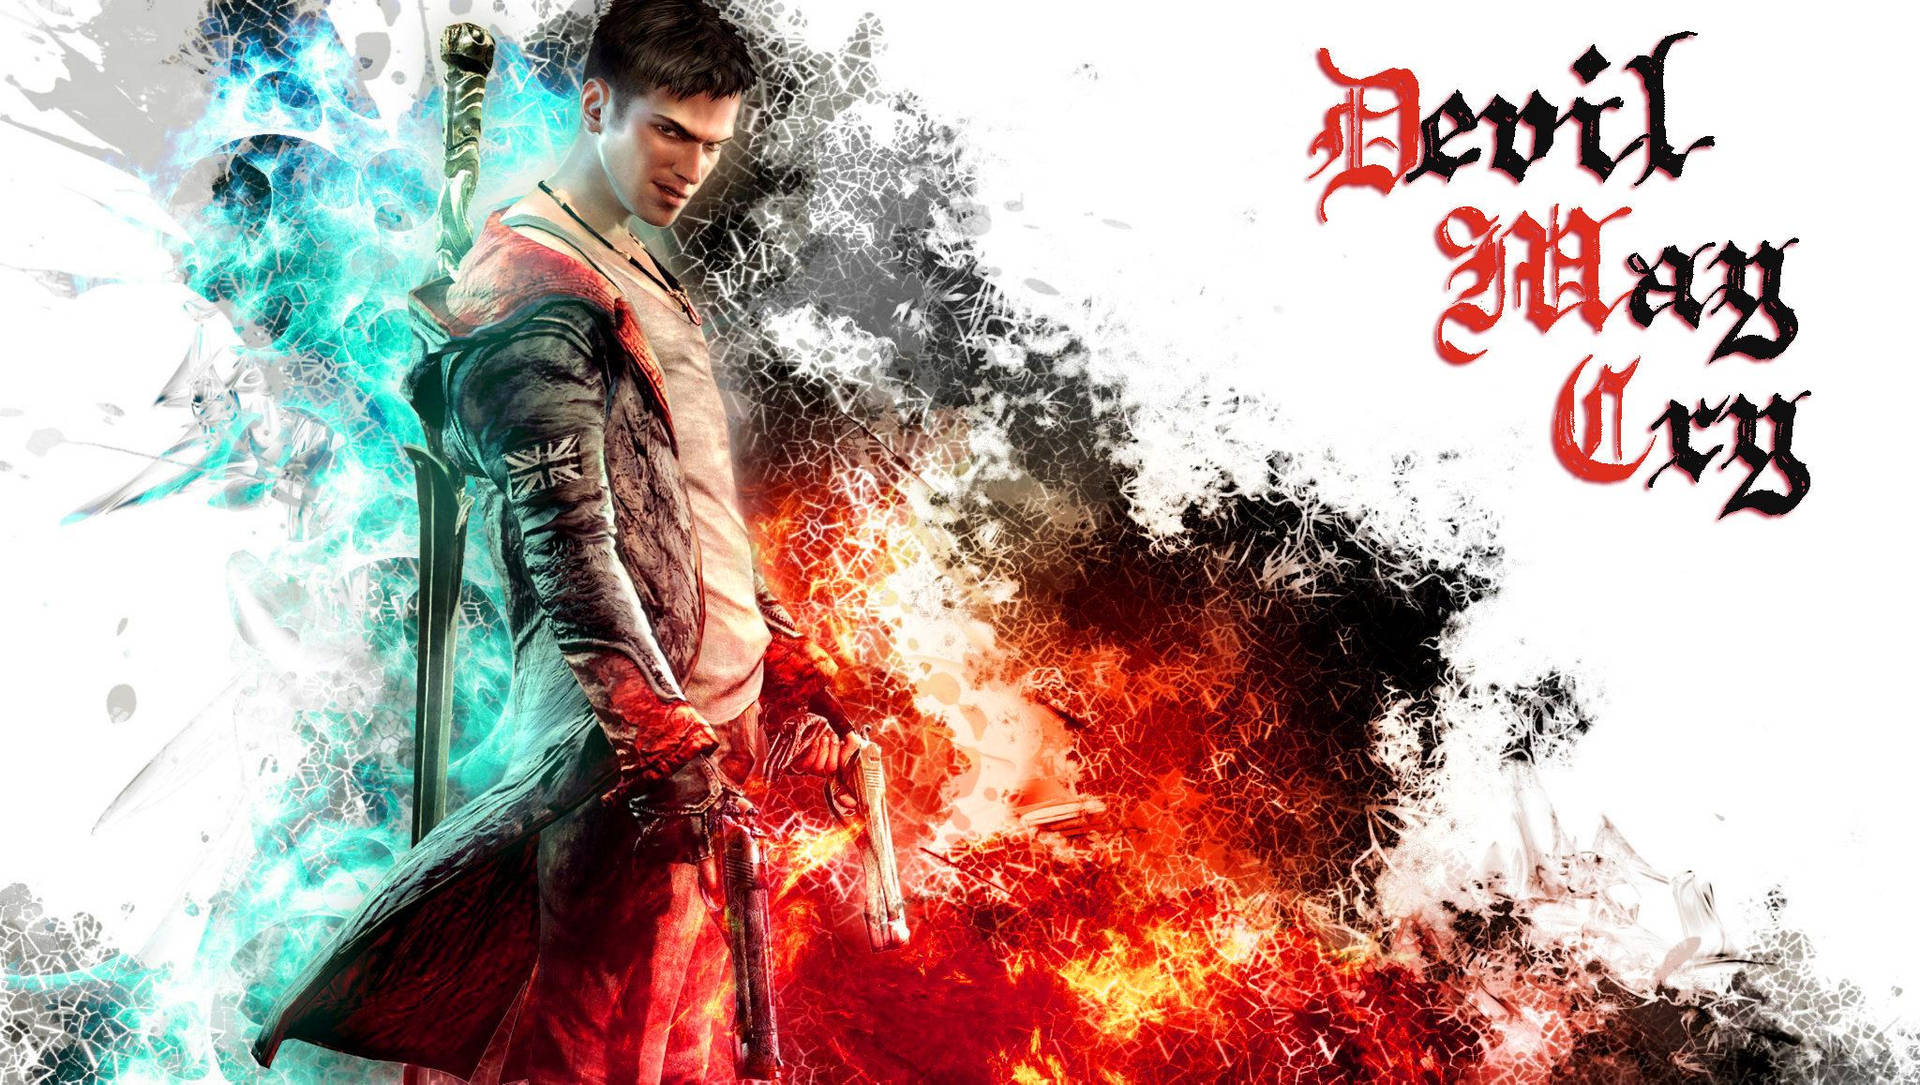 Free Devil May Cry Wallpaper Downloads, [100+] Devil May Cry Wallpapers for  FREE 